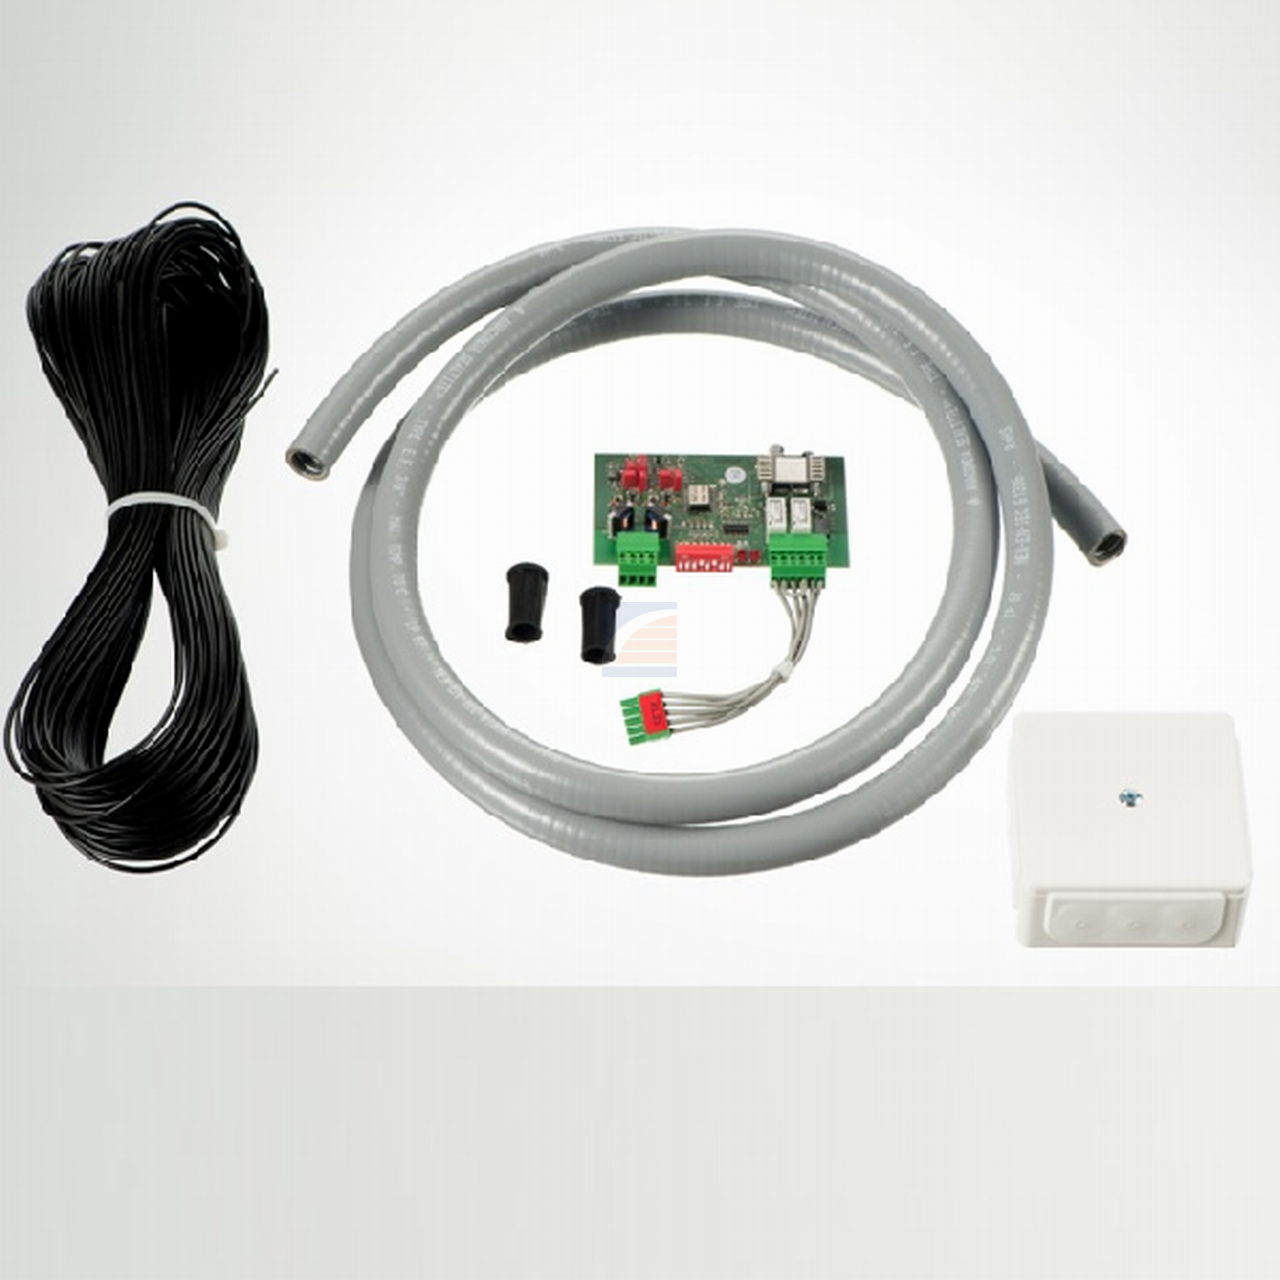 ForceLD Lusdetector kit